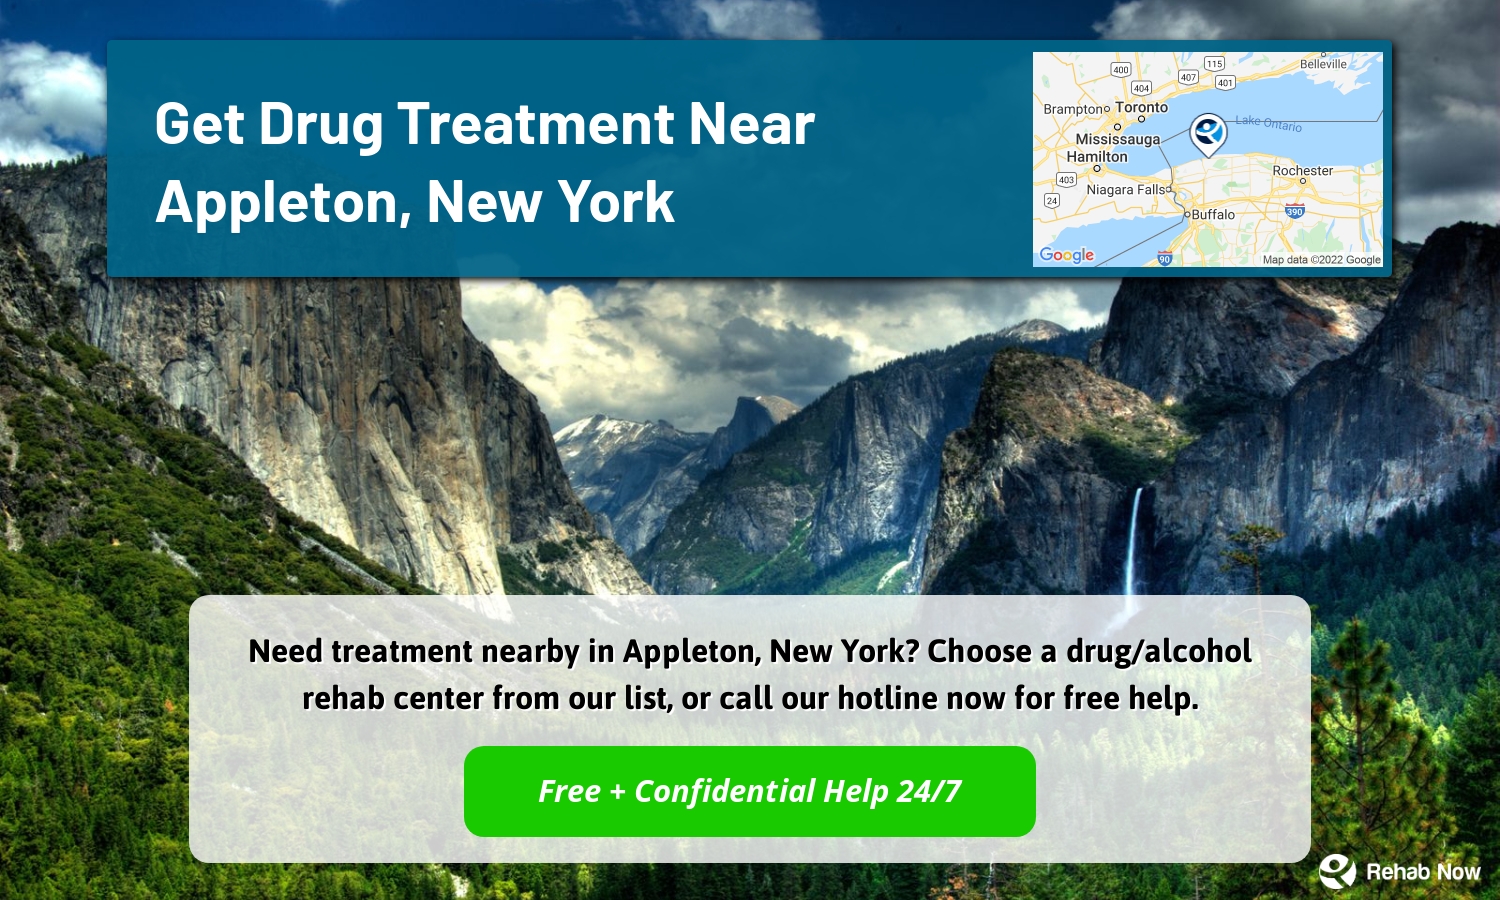 Need treatment nearby in Appleton, New York? Choose a drug/alcohol rehab center from our list, or call our hotline now for free help.